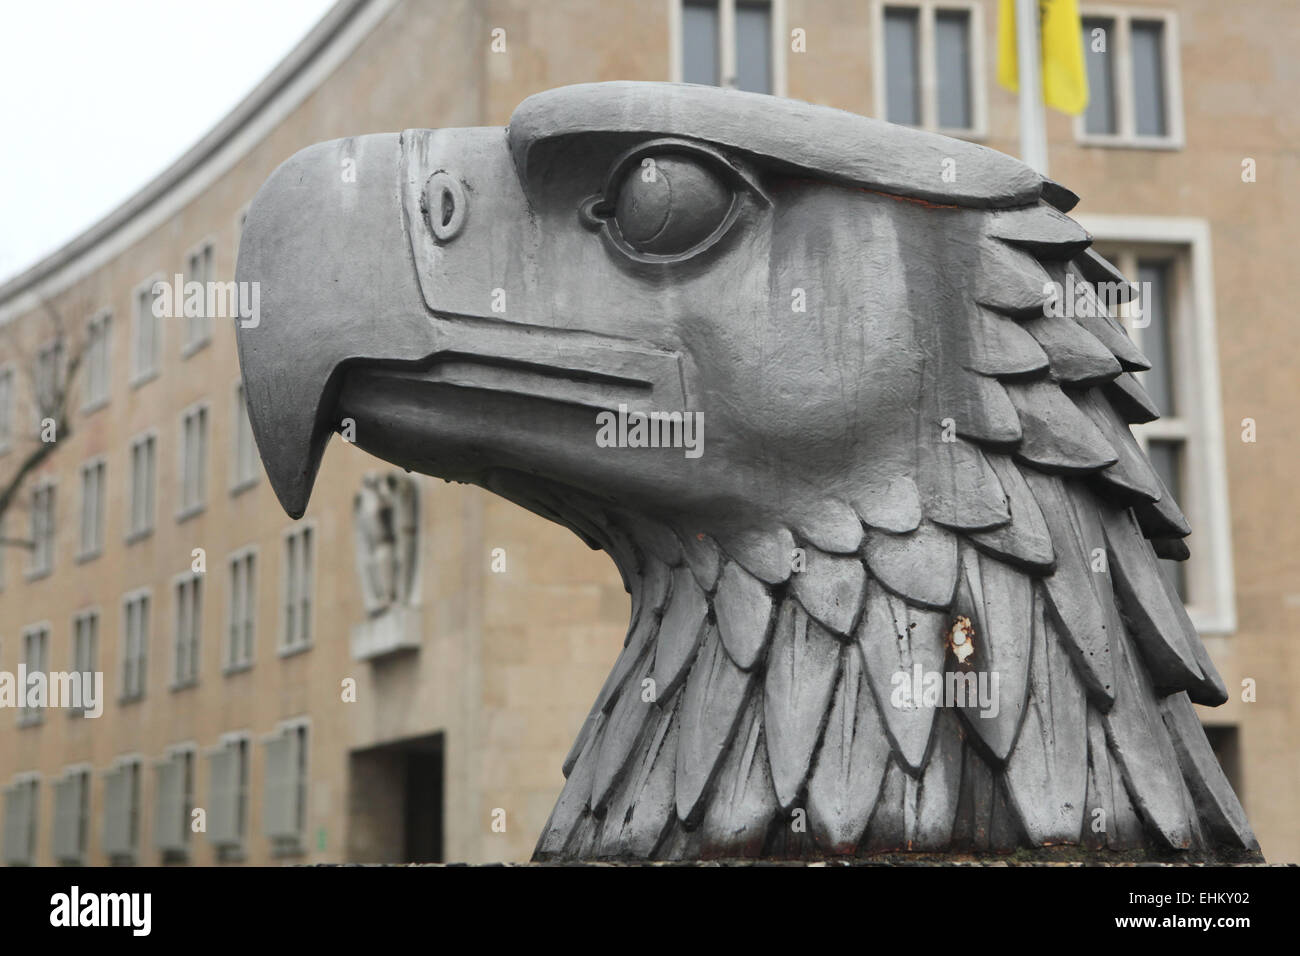 Reichsadler. Huge metal head of Nazi eagle from the 1930s installed in front of the Tempelhof Airport in Berlin, Germany. Stock Photo